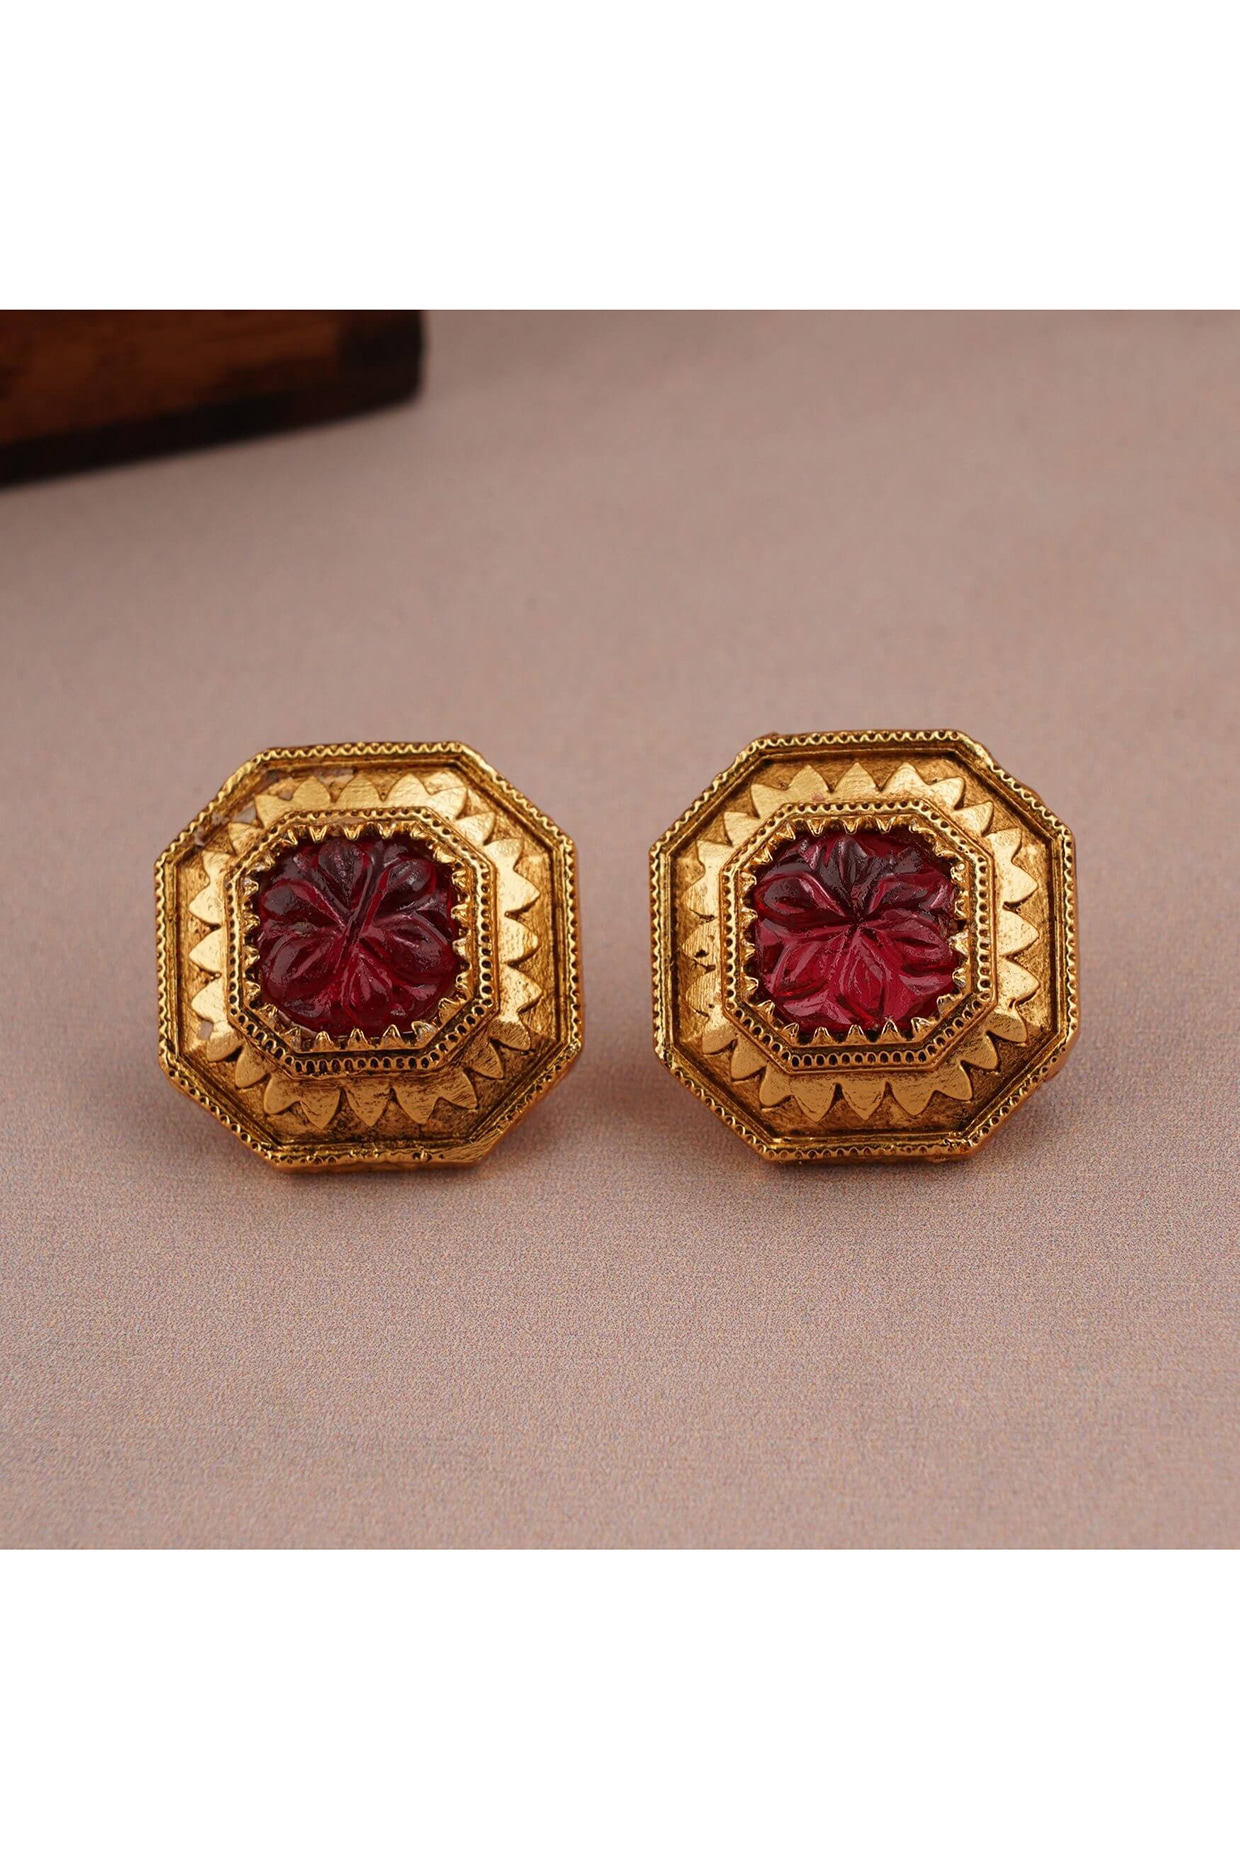 CZ,Ruby Stones,Triangle Flower Design Screw Stud Earrings Gold Finished  Premium Quality Set Buy Online